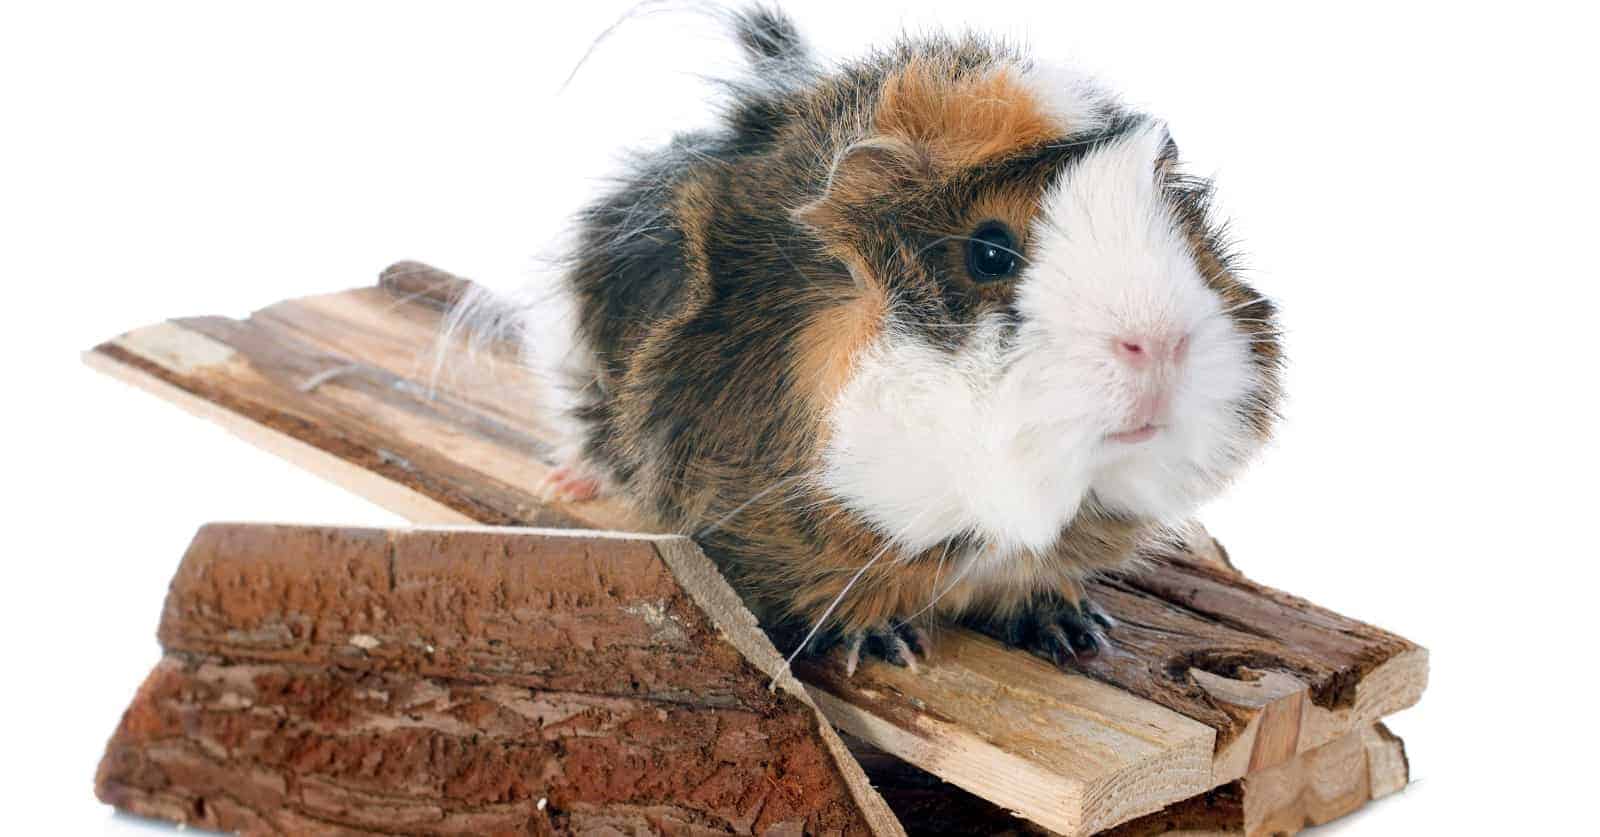 If you're looking for some of the best guinea pig toys, we've got you covered! Check out our top 10 picks!